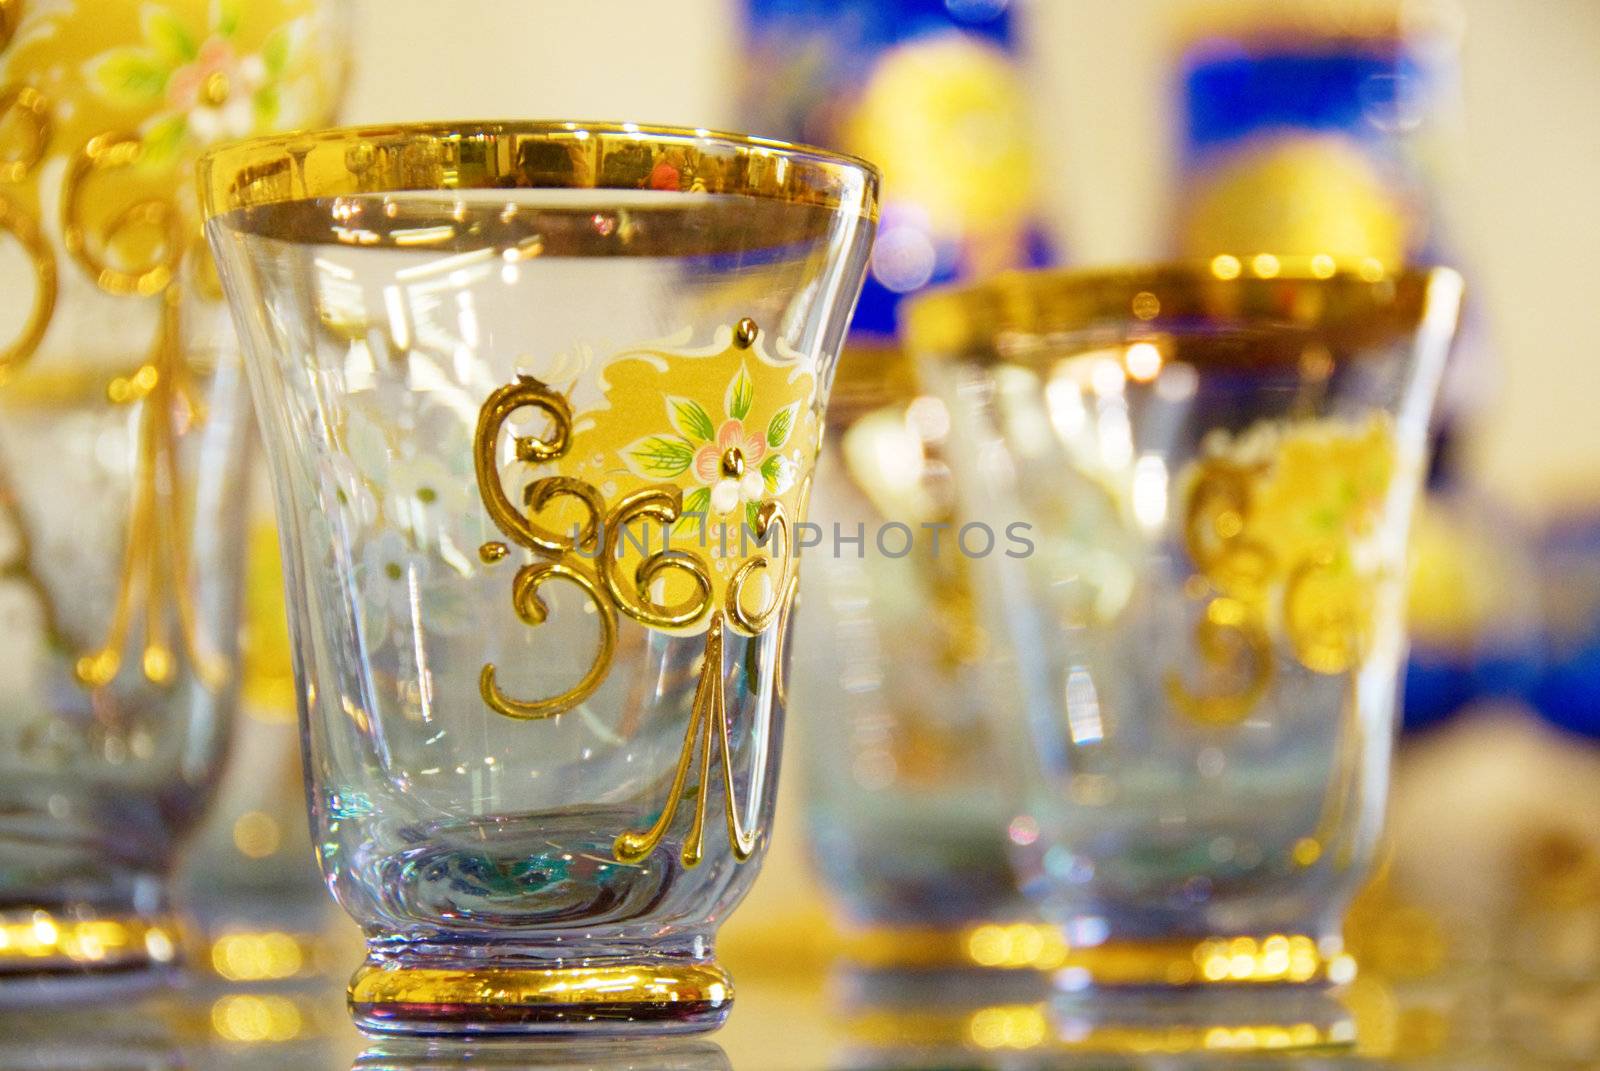 Transparent blue hand-made glass covered with gold drawing. Shallow depth-of-field